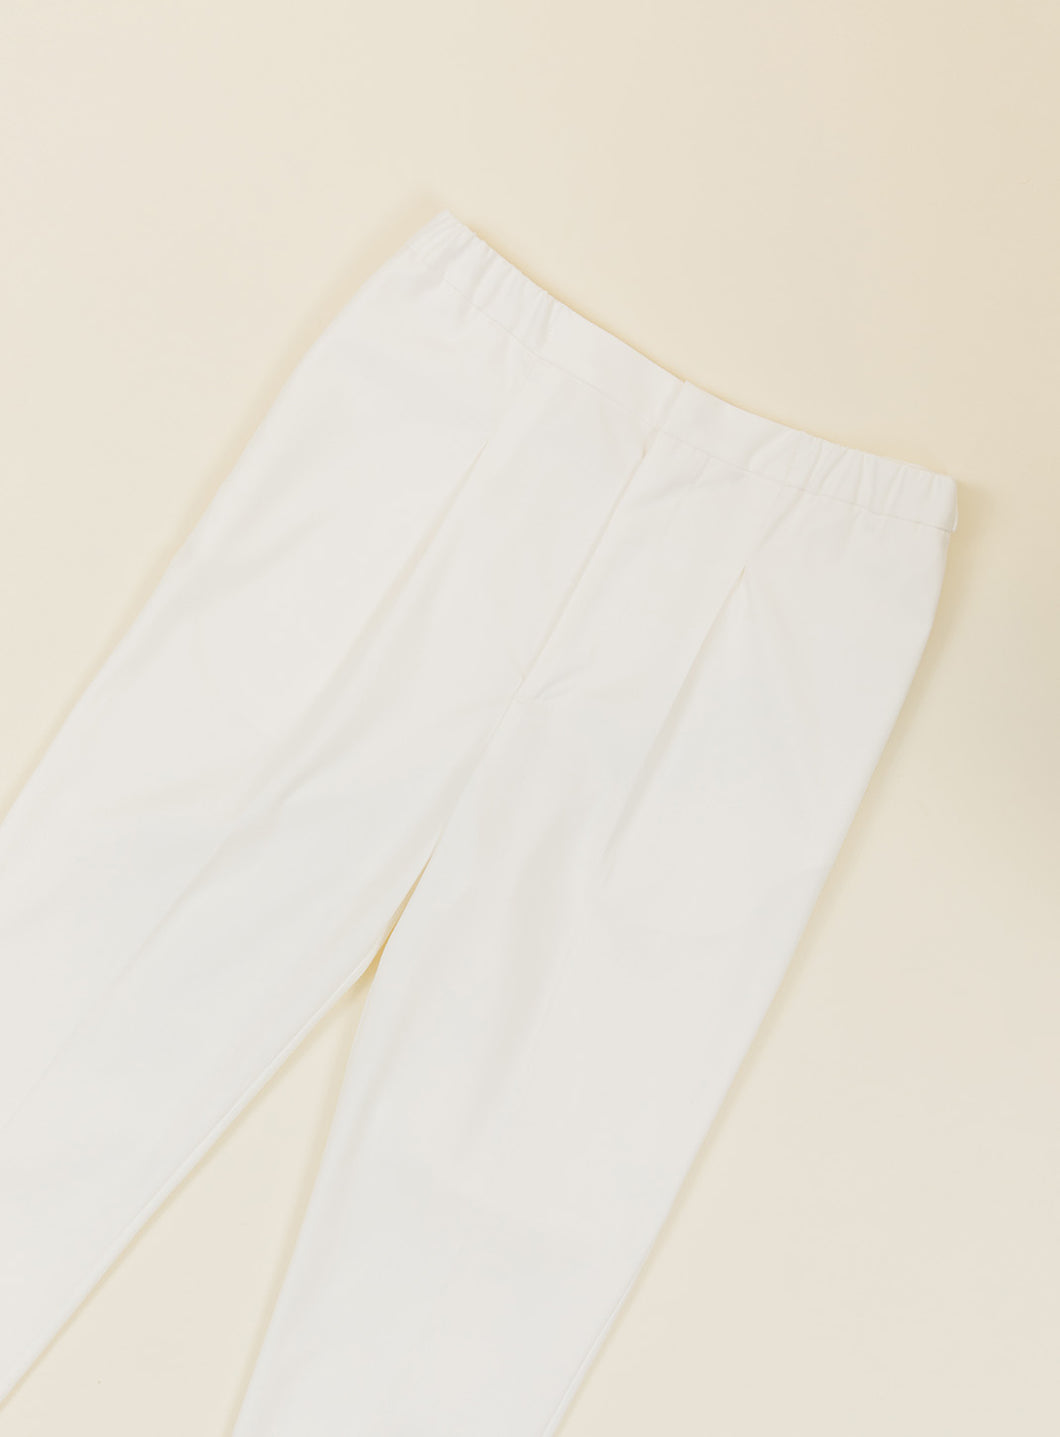 Pleated Pants in White Serge Fabric